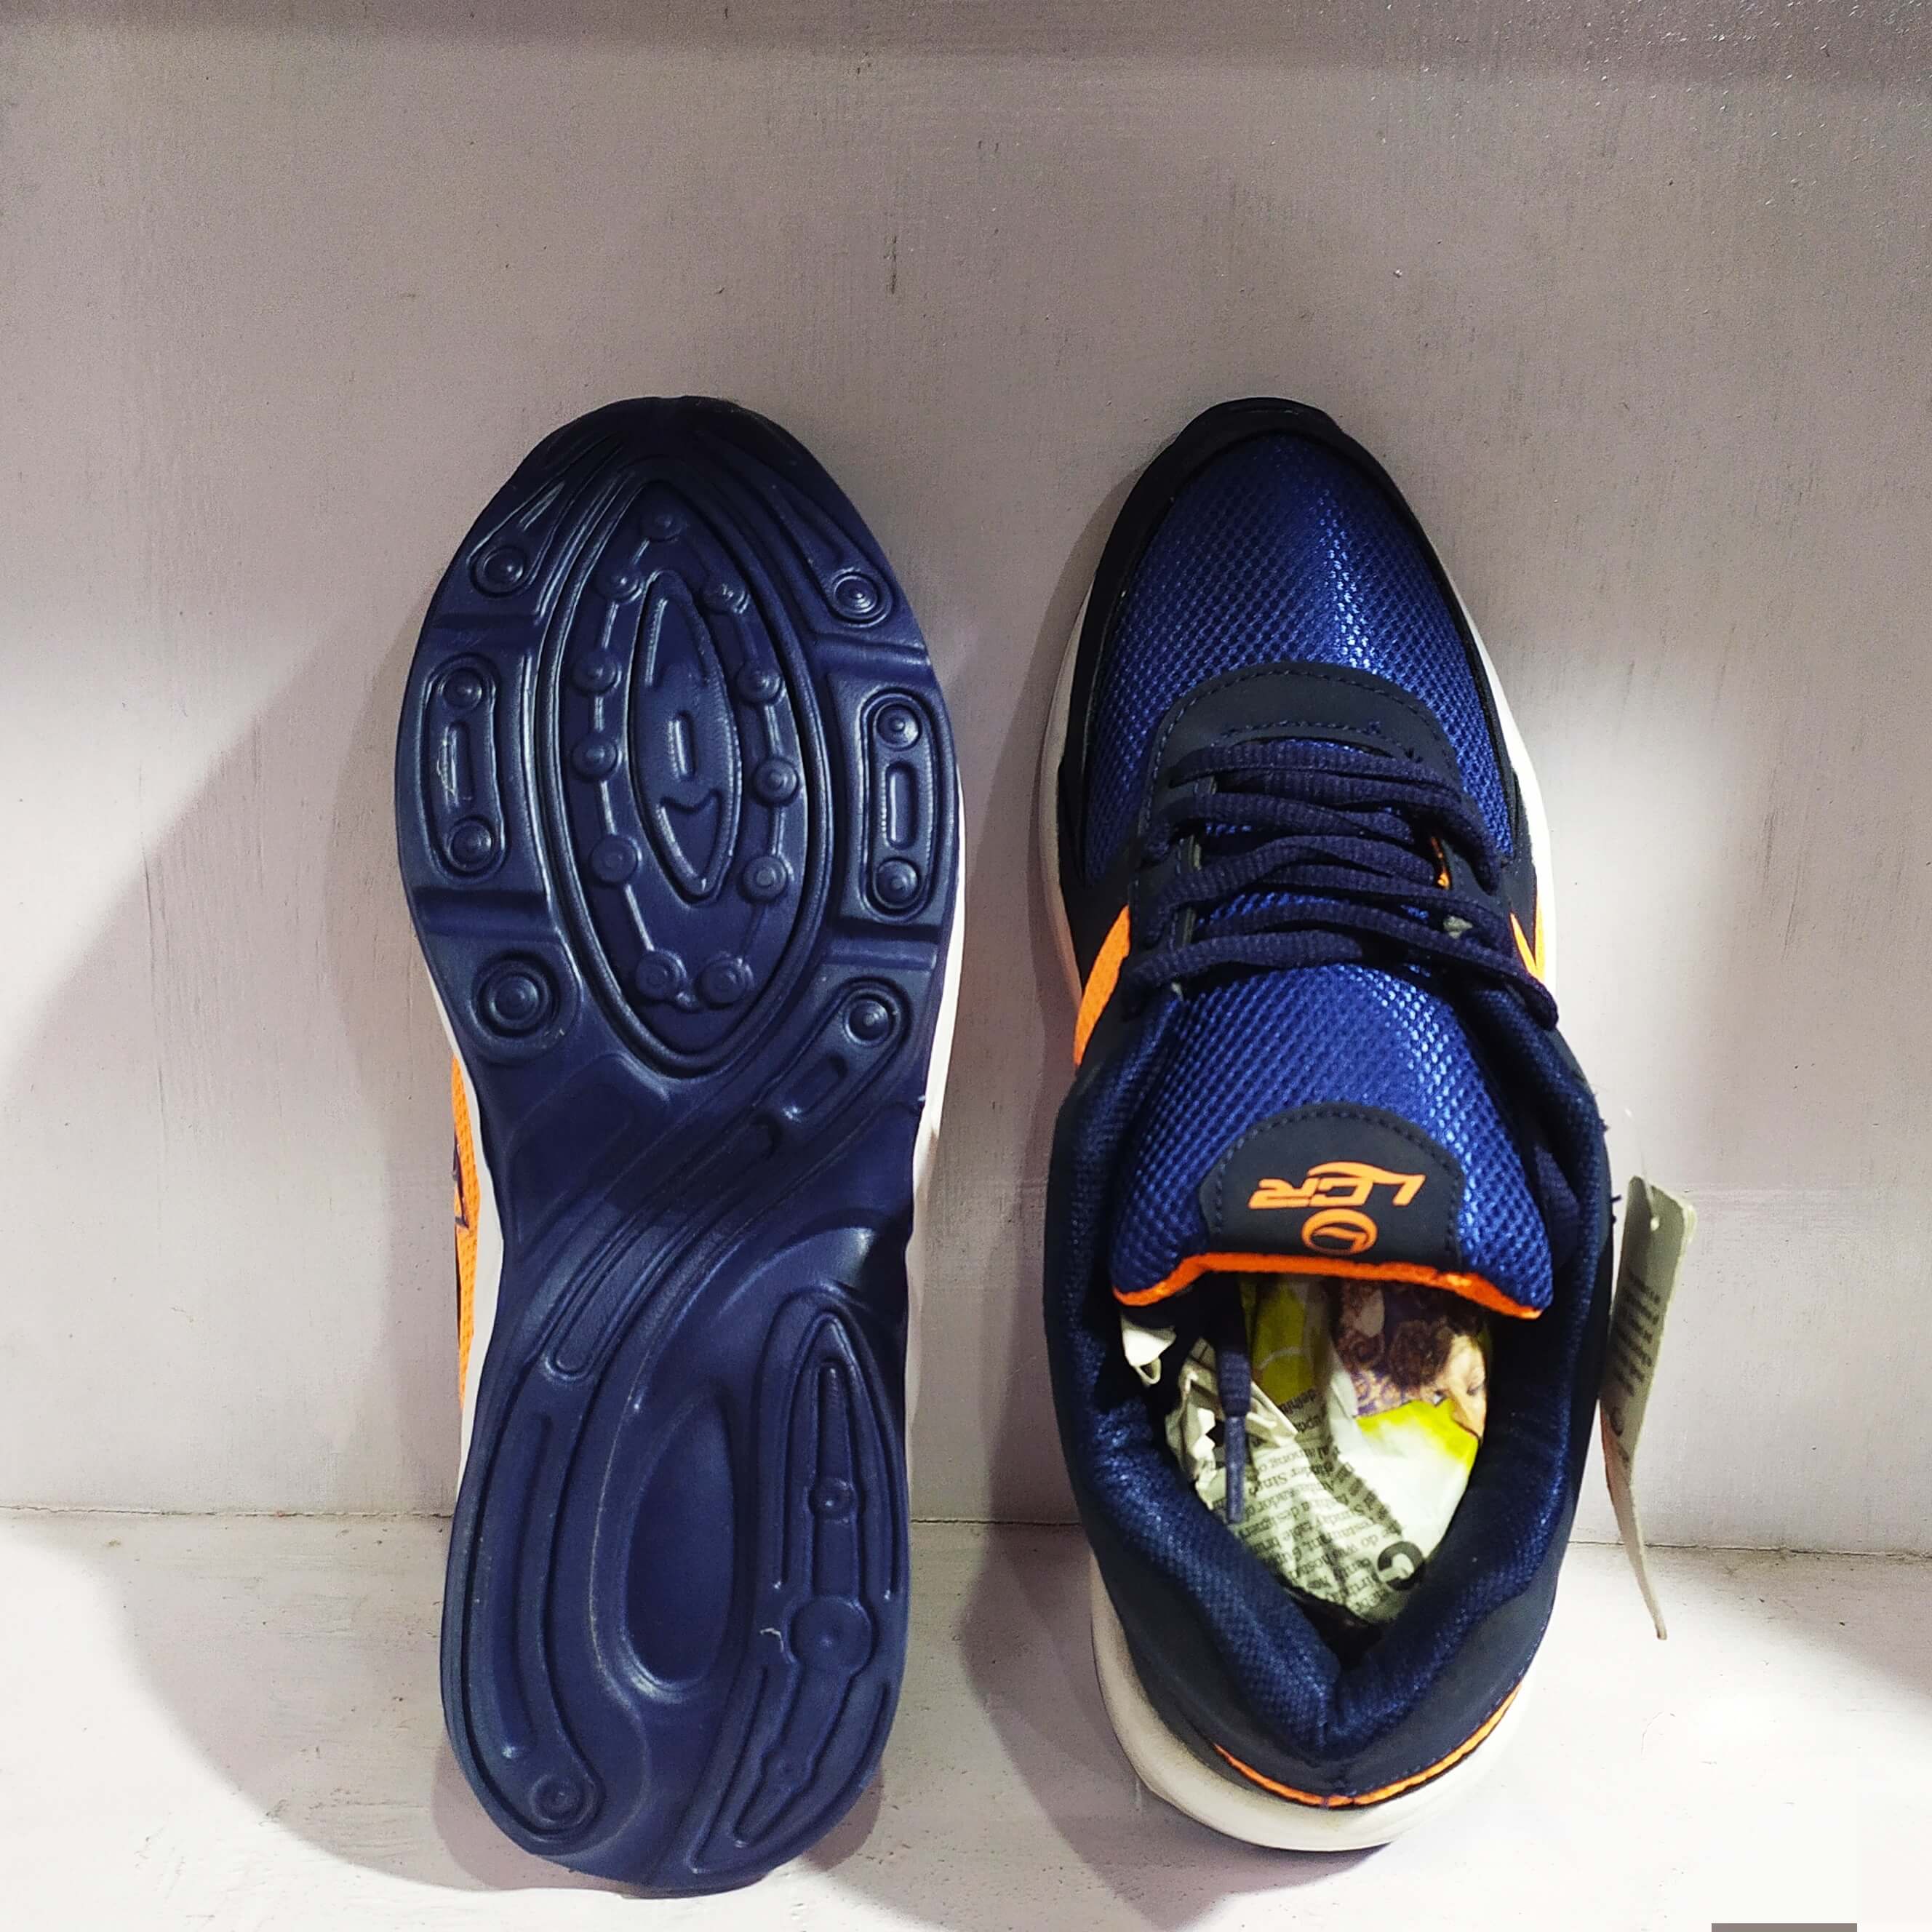 Lancer Sports Shoes Price Online StyloSale Product_tag ustom taxonomy